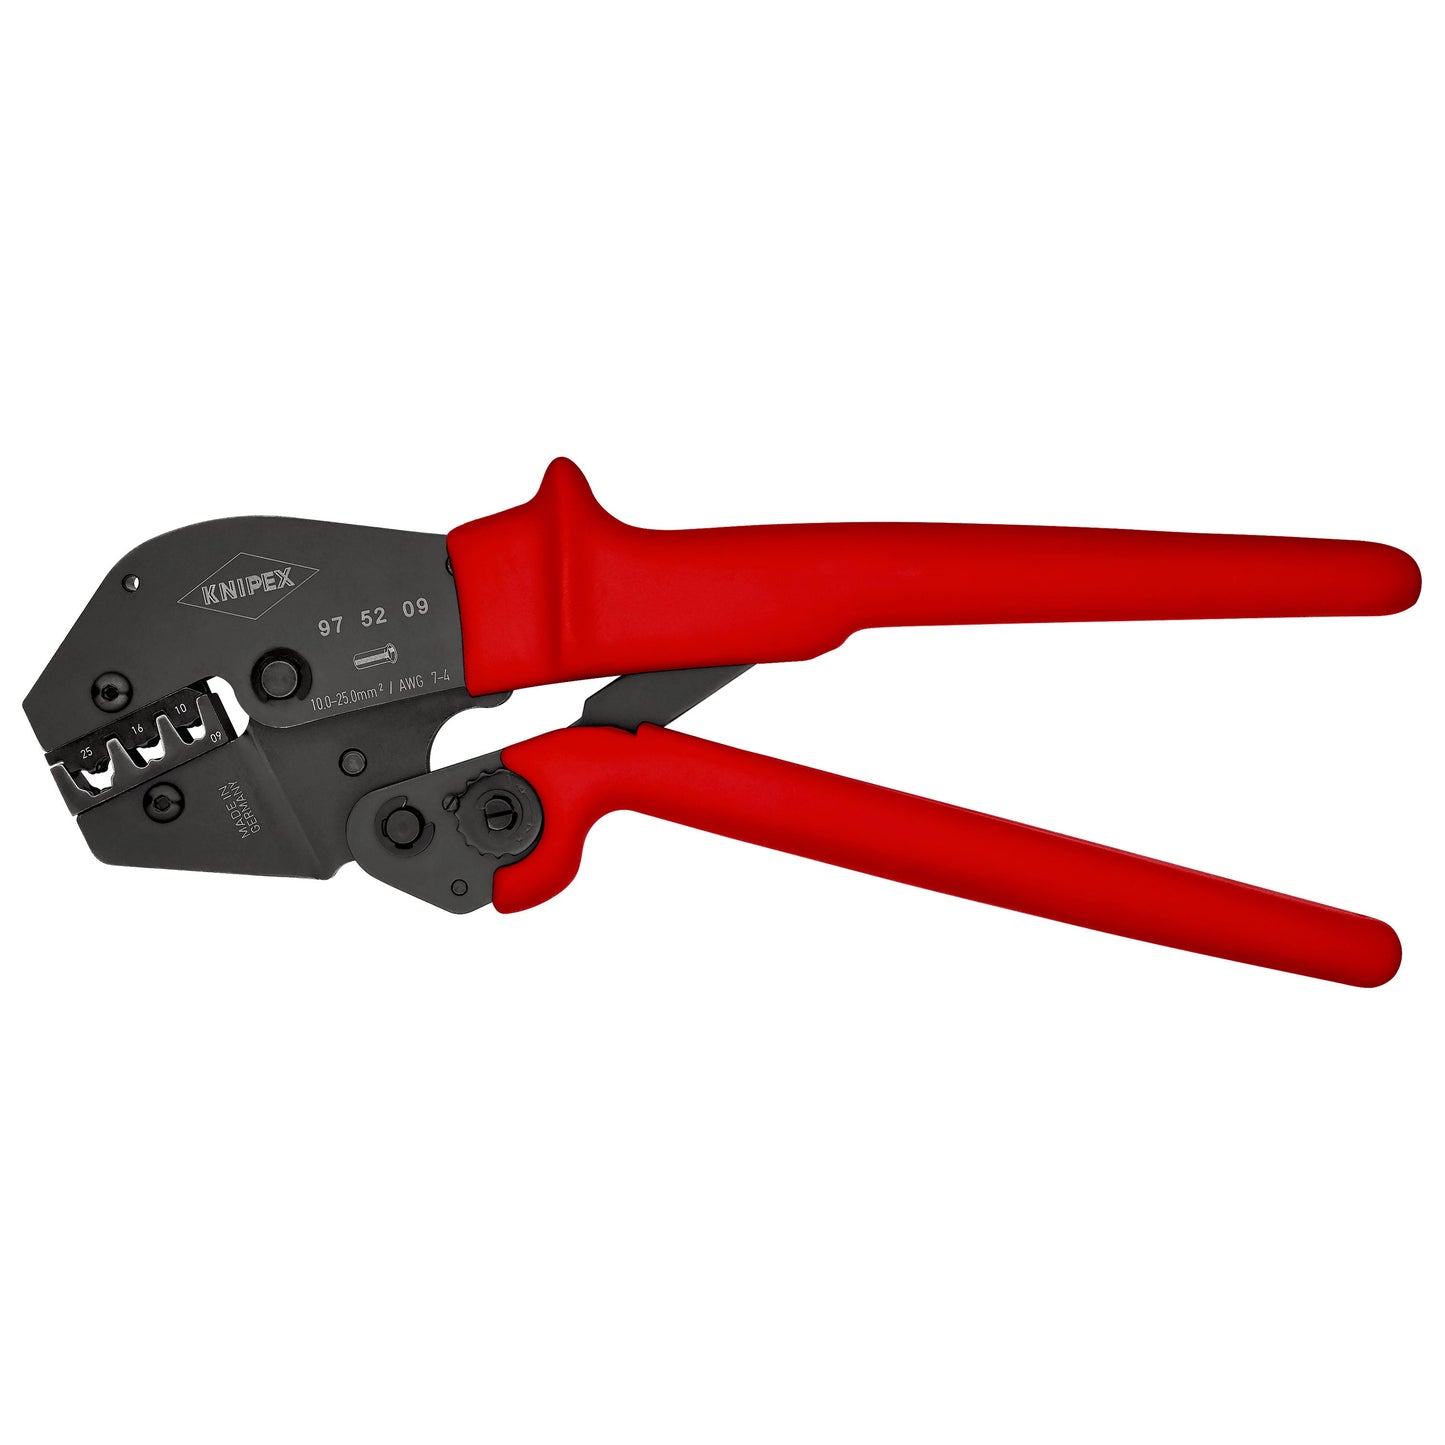 Knipex 97 52 09 - Two-handed terminal crimping pliers 250 mm